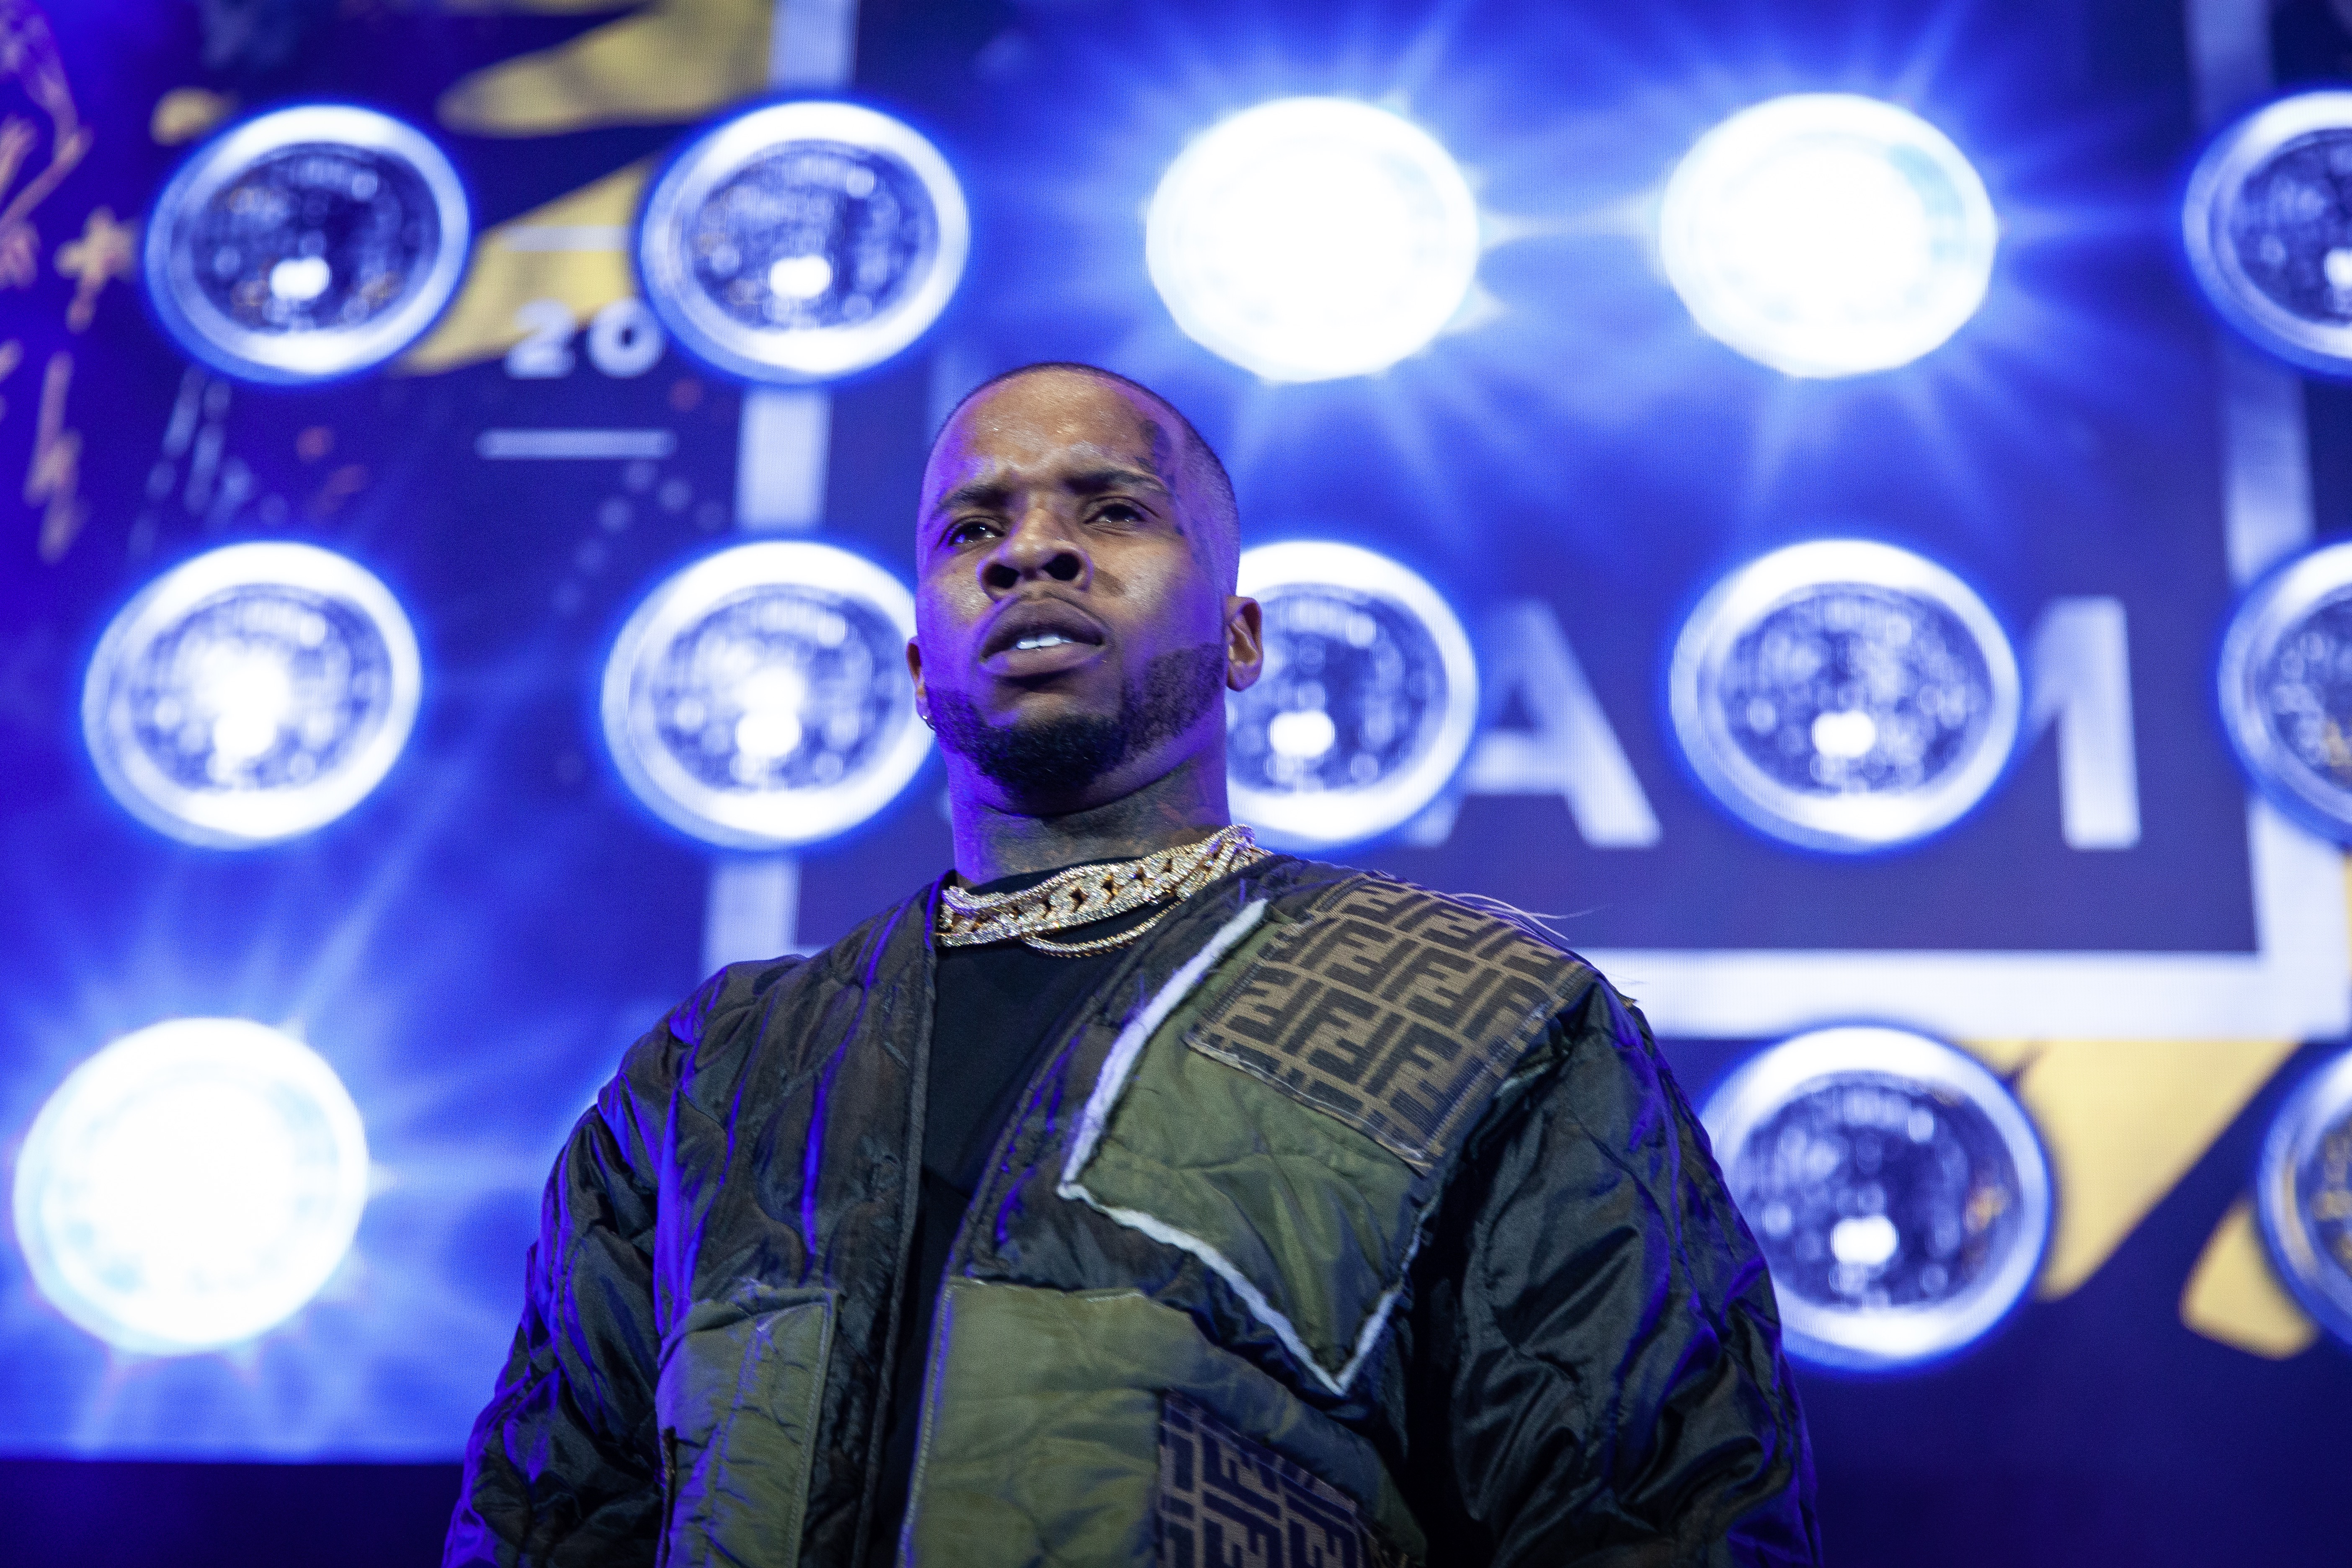 Tory Lanez’s Latest Attempt To Avoid Jail Time Is To Get The Judge Dismissed Ahead of Sentencing